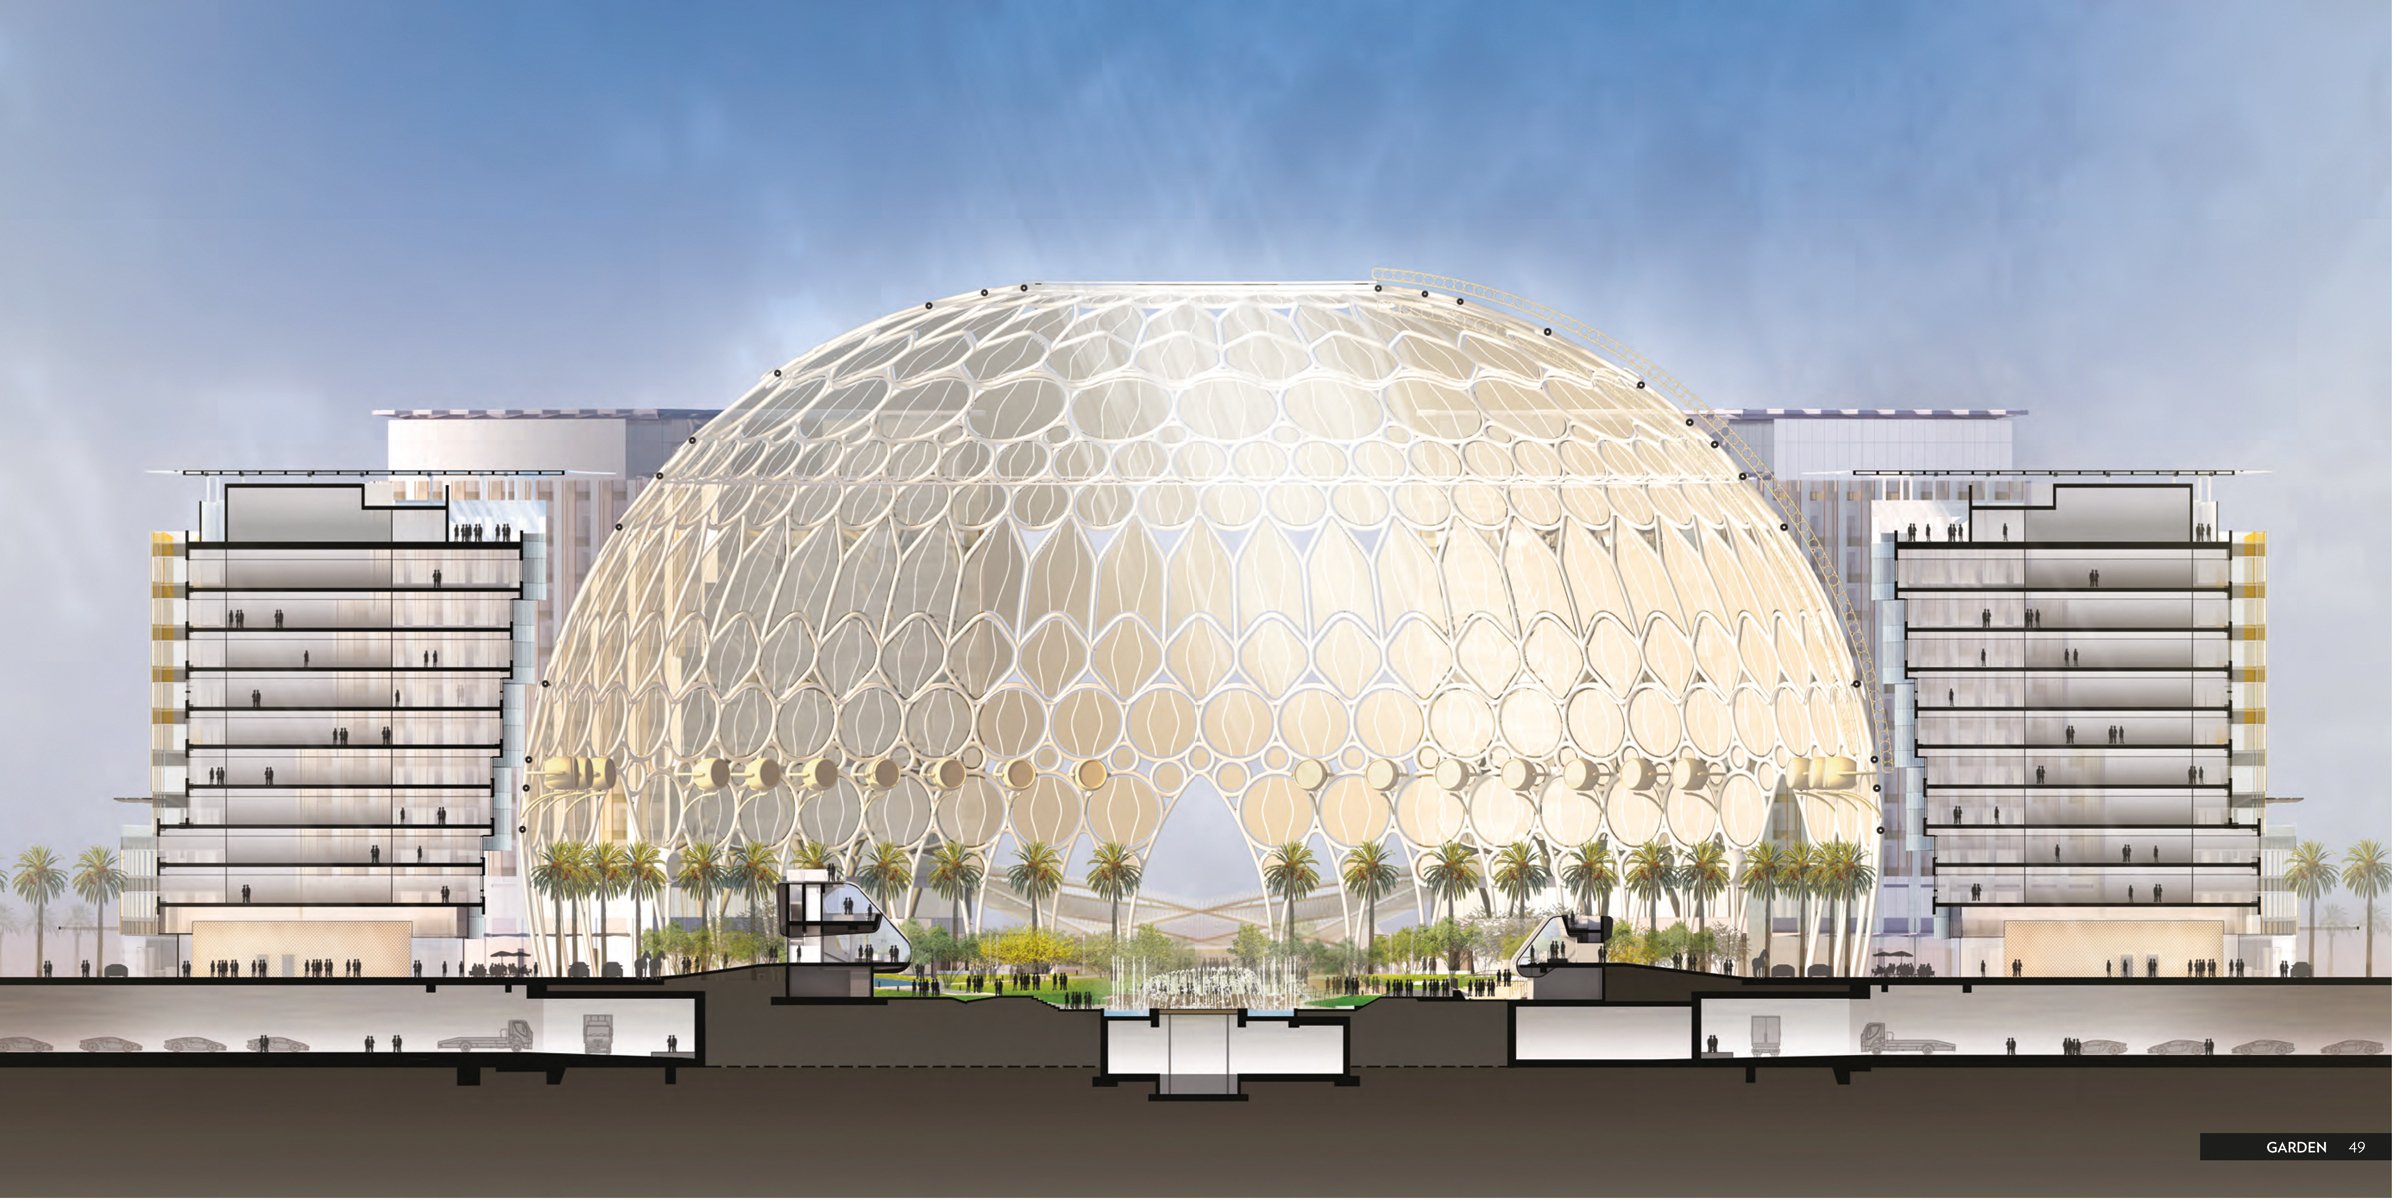 Gold cover with white geometrical spiral latticed pattern, Al Wasl Plaza Dubai Expo 2020 in white font to centre.